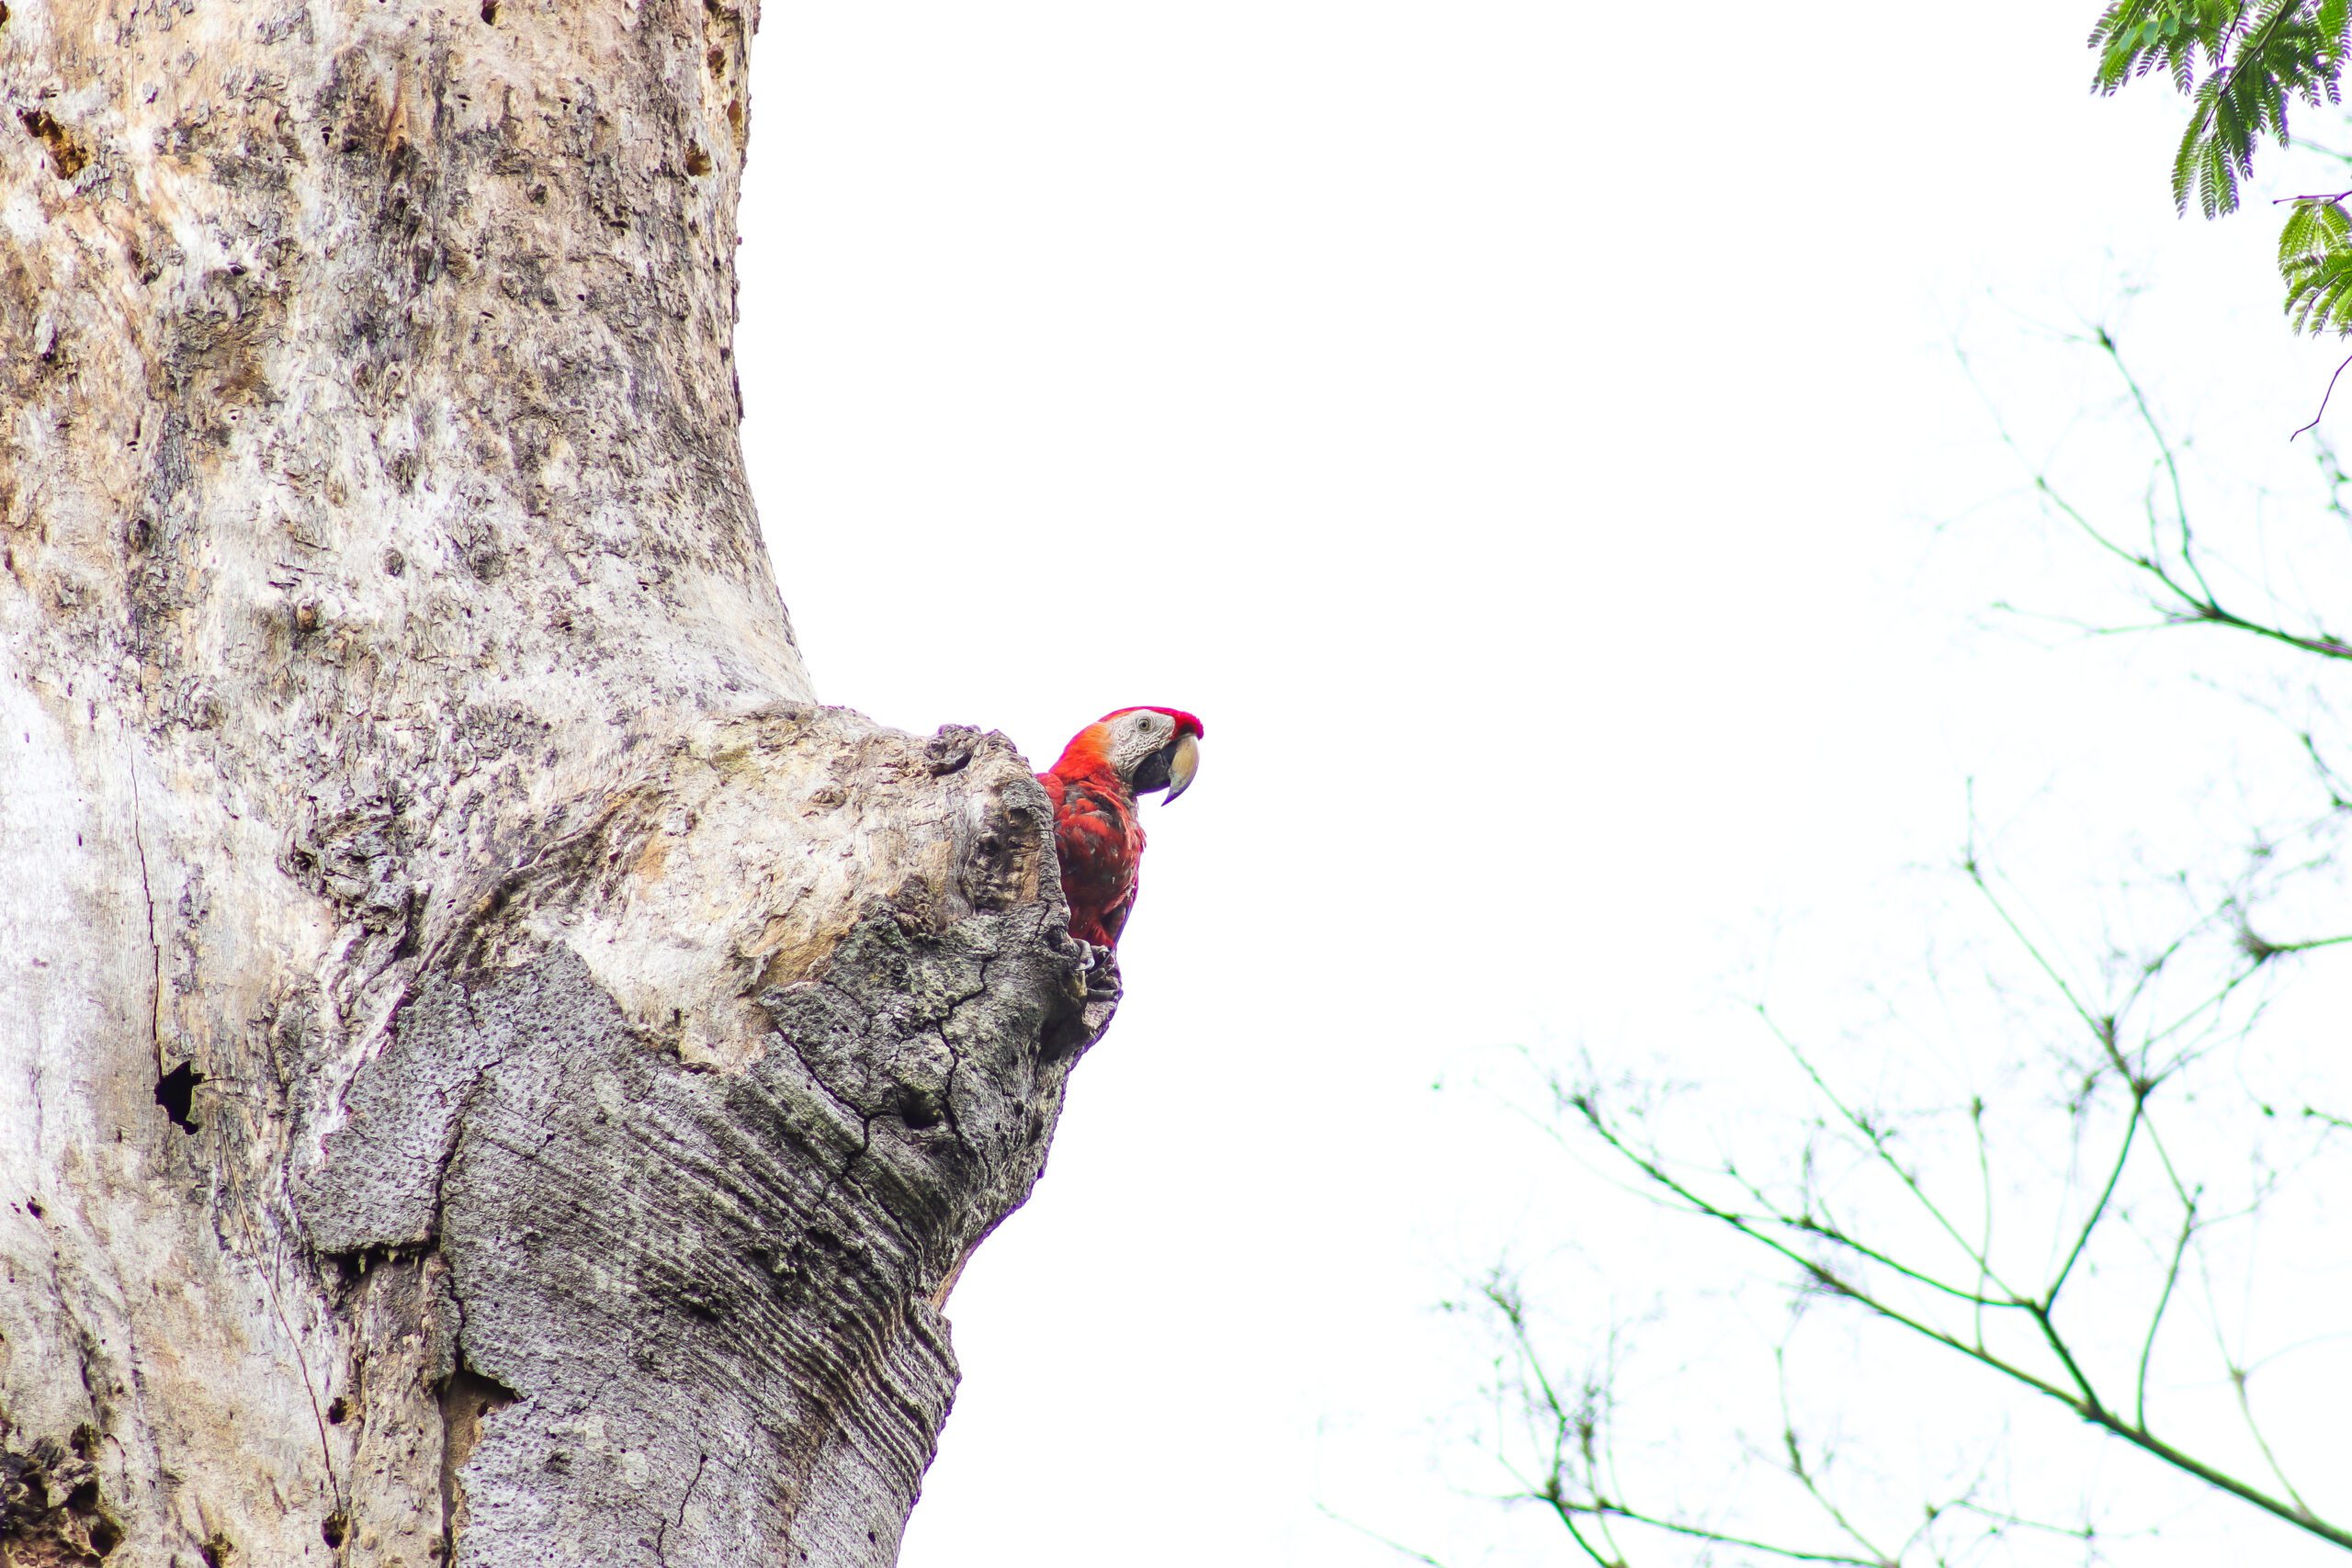 The Chiquibul is one of the last known breeding grounds in Belize for Scarlett Macaws.